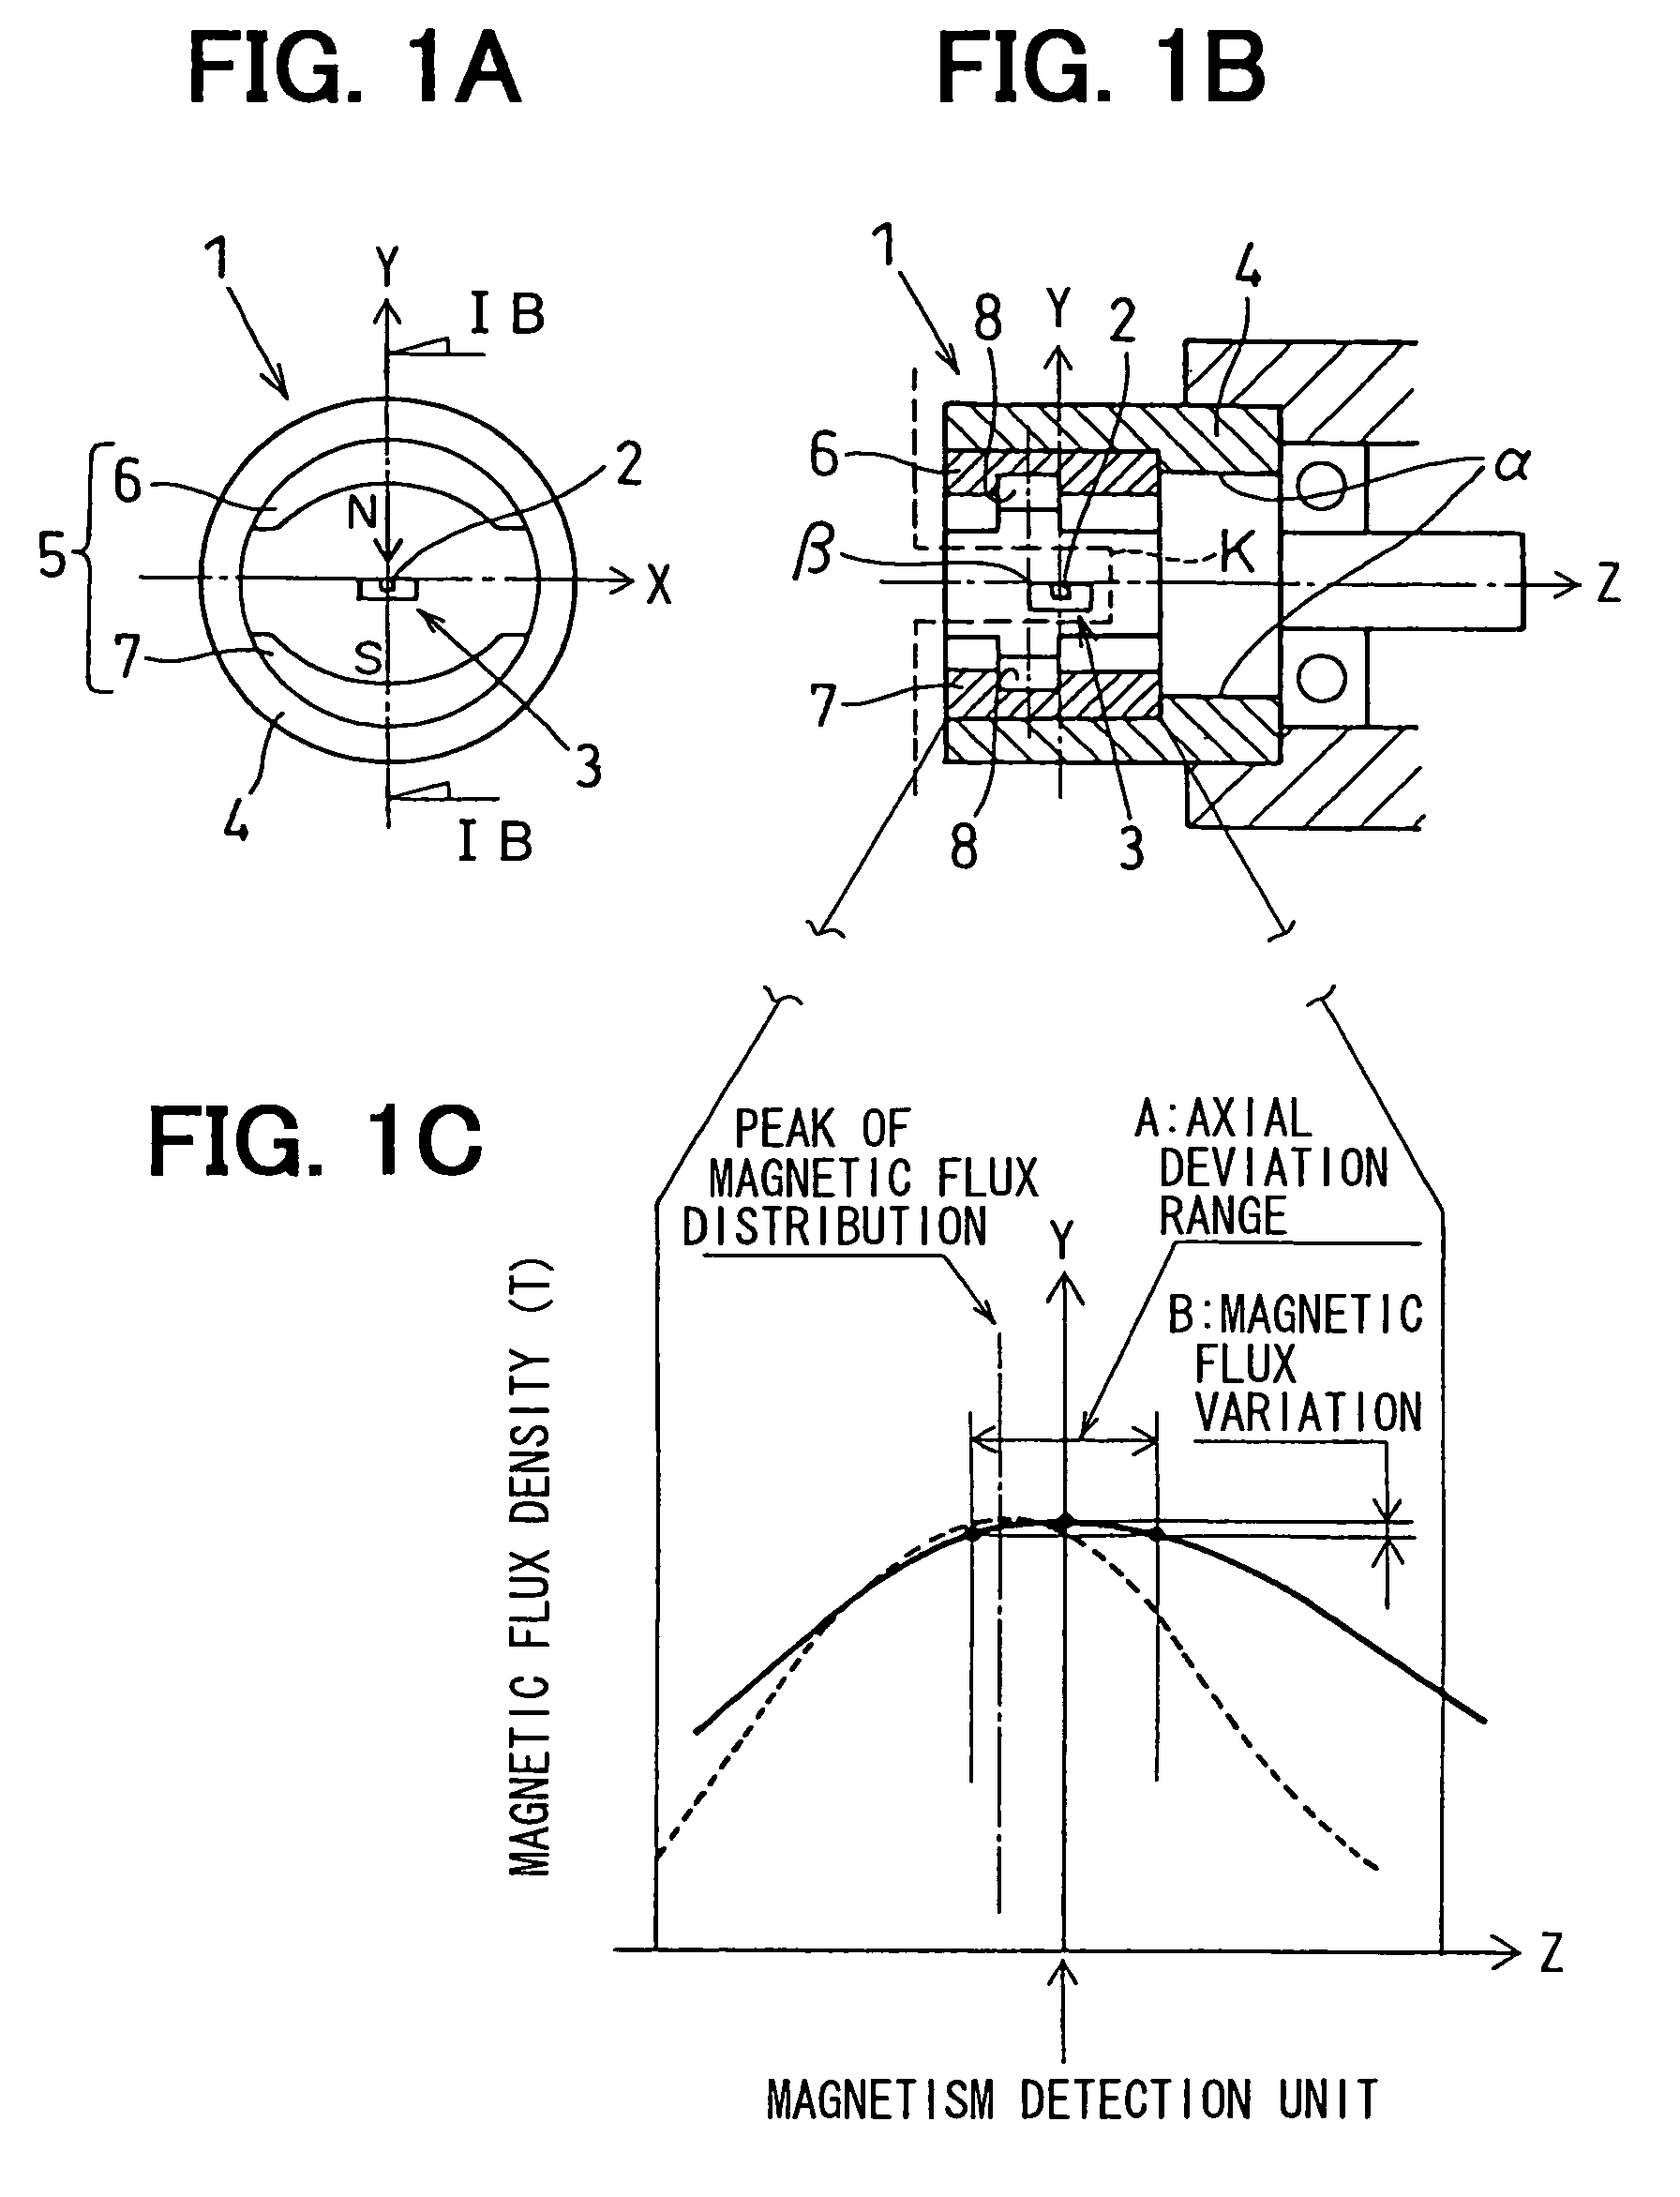 Rotation angle detection device having magnetic flux alteration unit